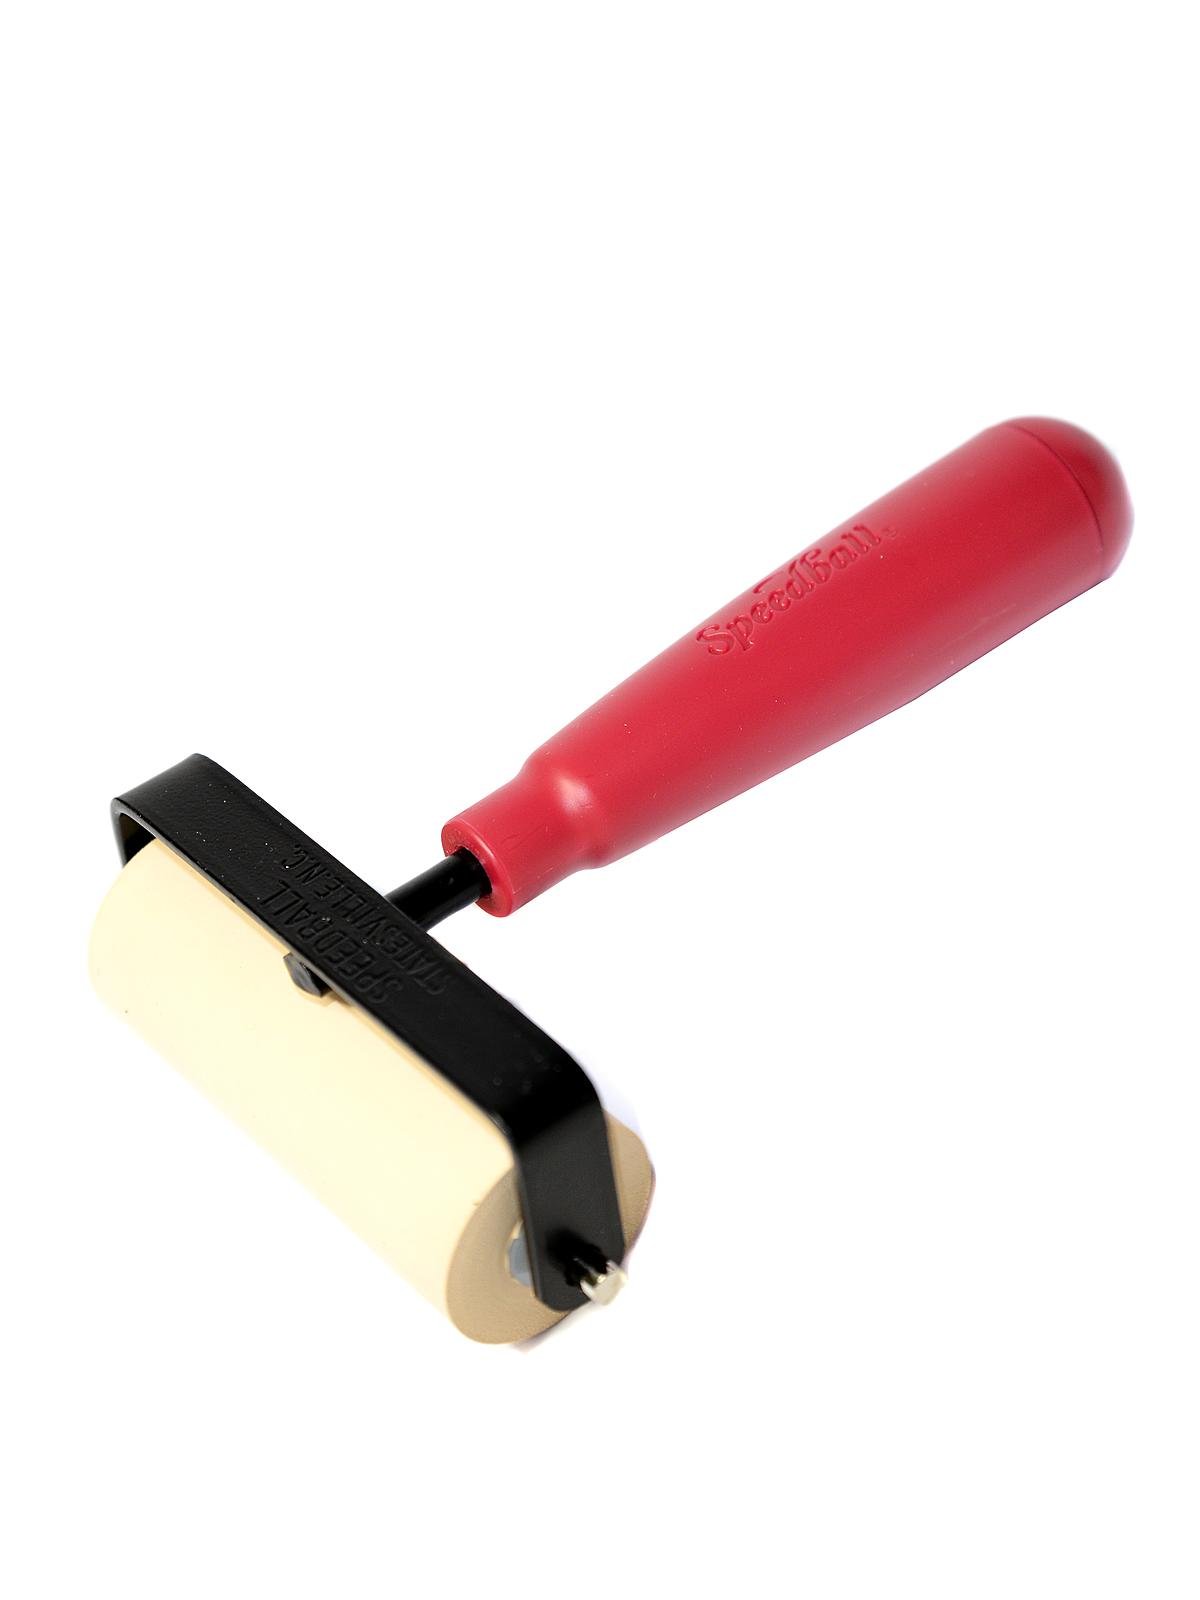 8-Inch and 4-Inch Professional Hard Rubber Brayer Roller for